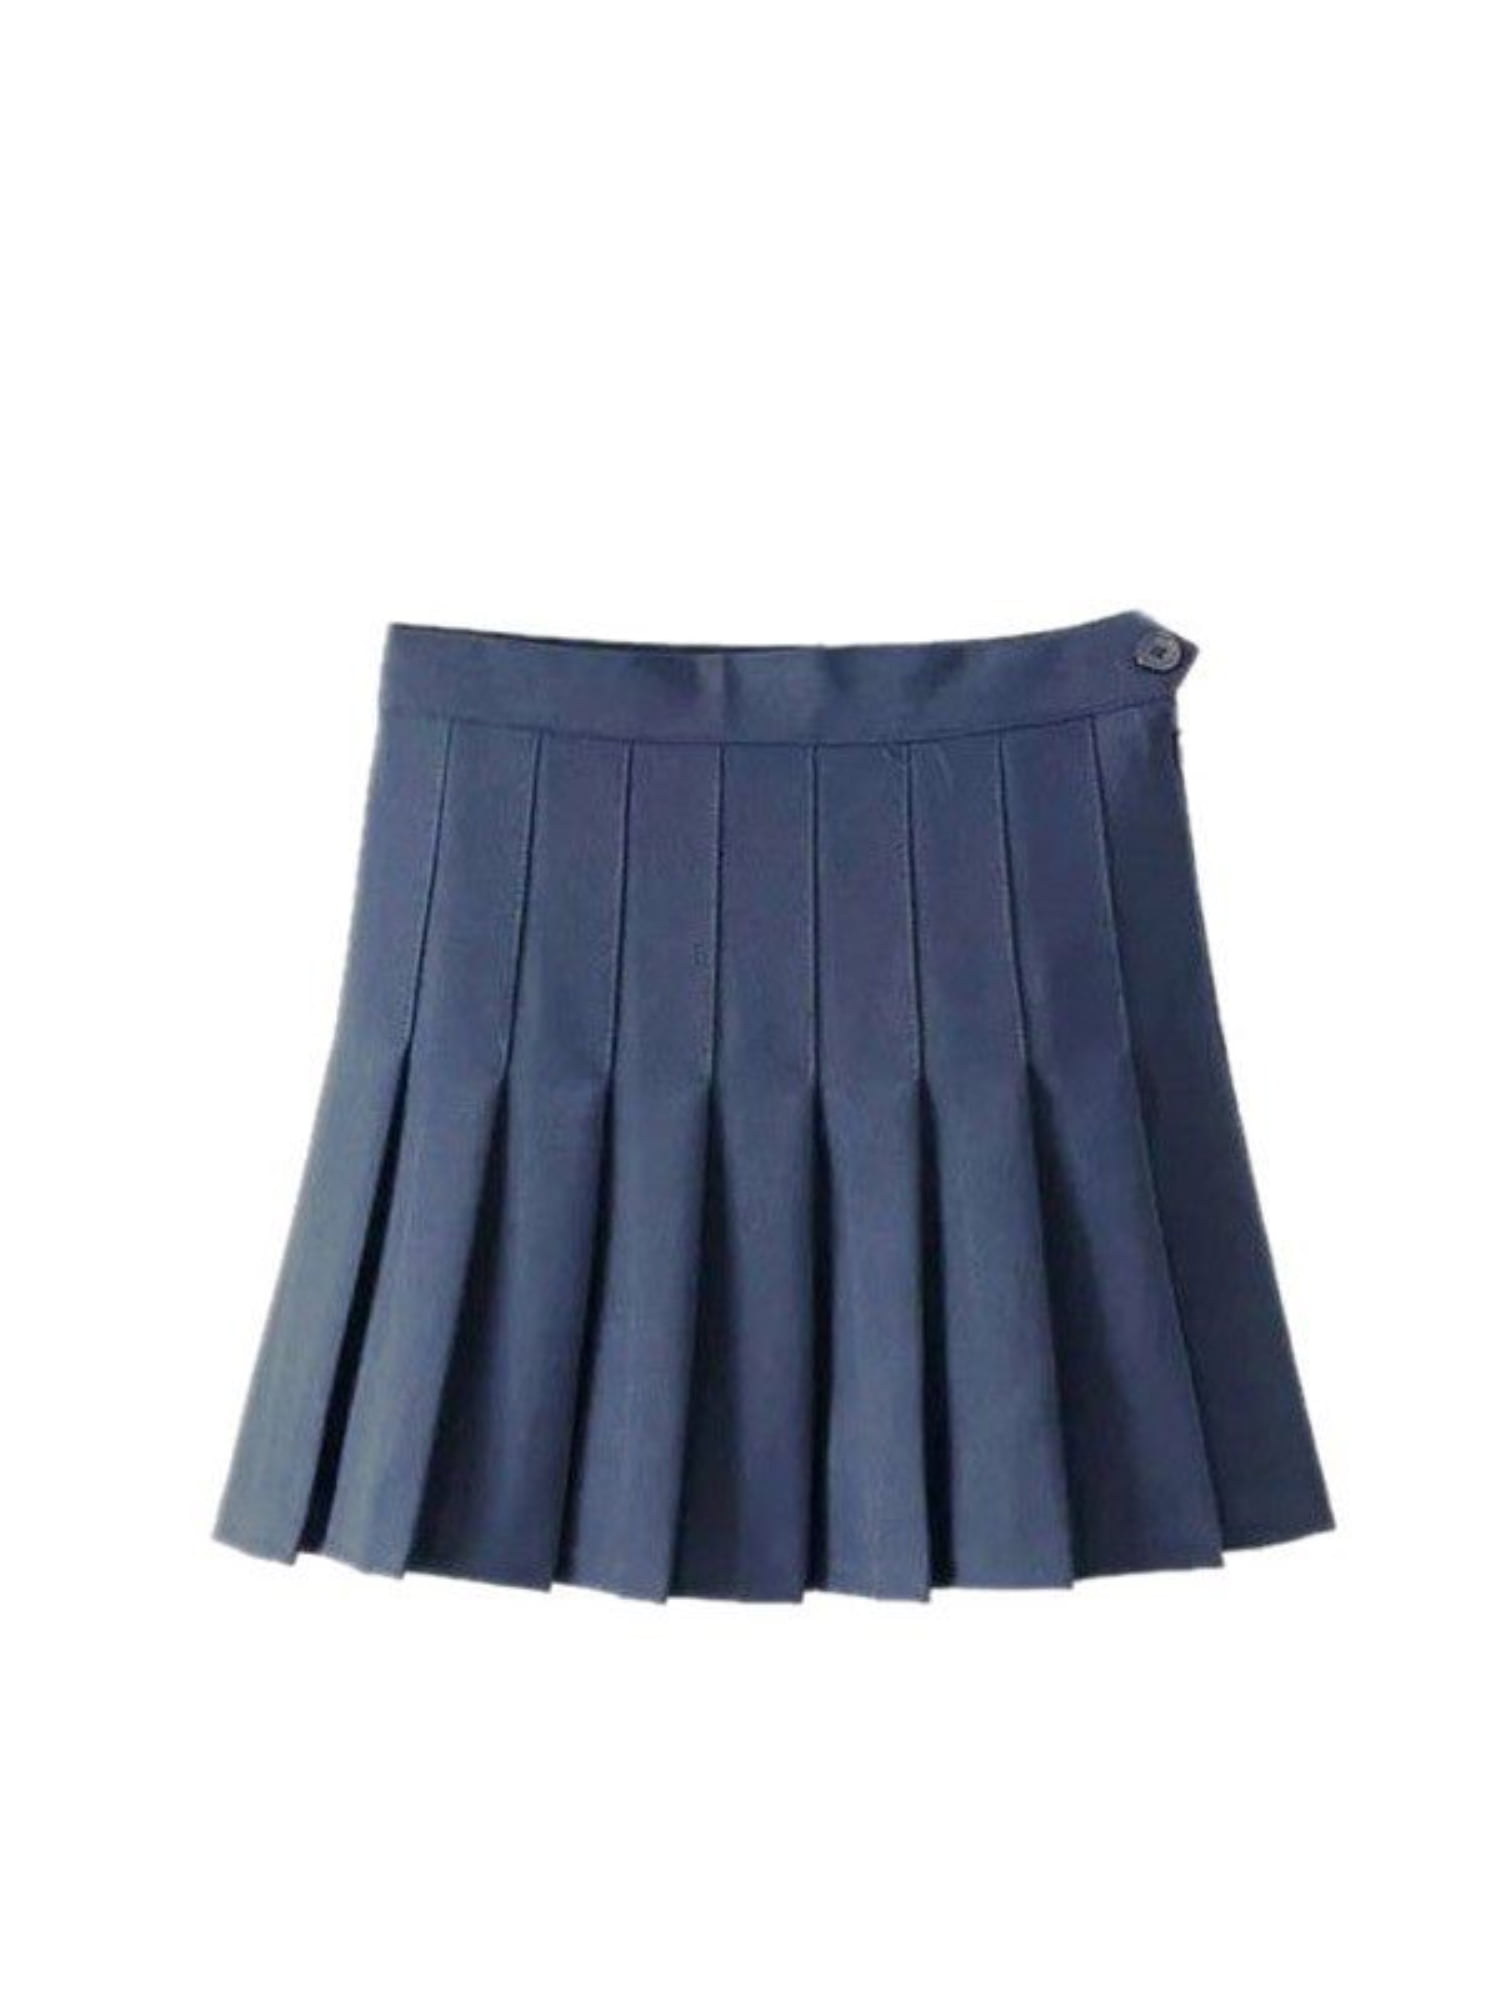 NEW The Children's Place Girls Black Pleated Skirt With Shorts Size L 10 